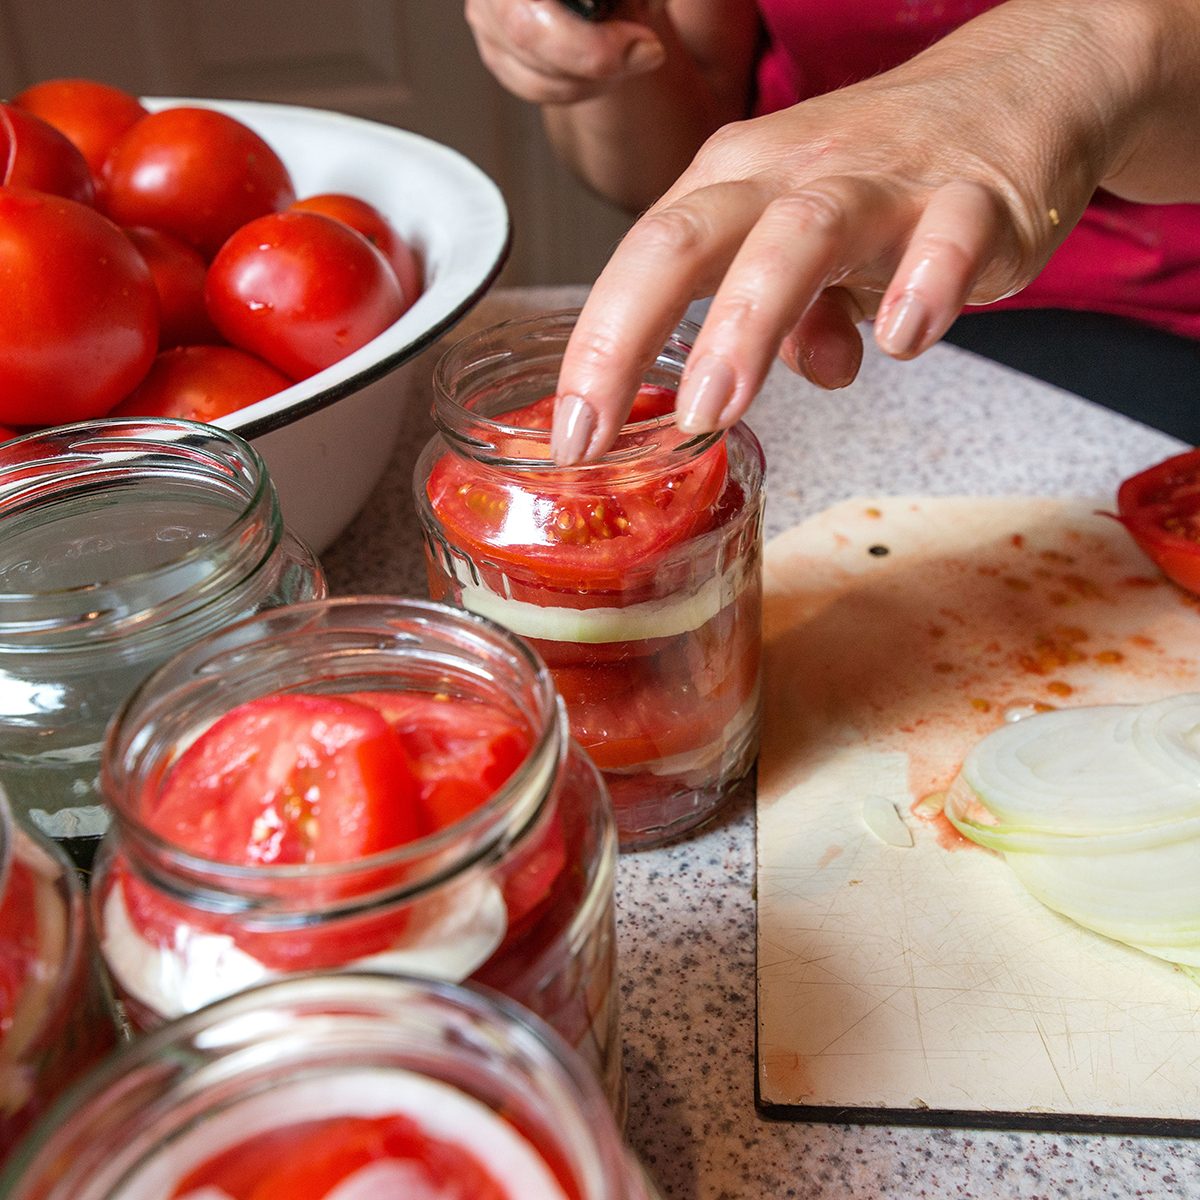 Canning fresh tomatoes with onions in jelly marinade. Woman hands putting red ripe tomato slices and onion rings in jars. Basil, parsley leaves on top of onions. Vegetable salads for winter ; Shutterstock ID 1205461483; Job (TFH, TOH, RD, BNB, CWM, CM): TOH